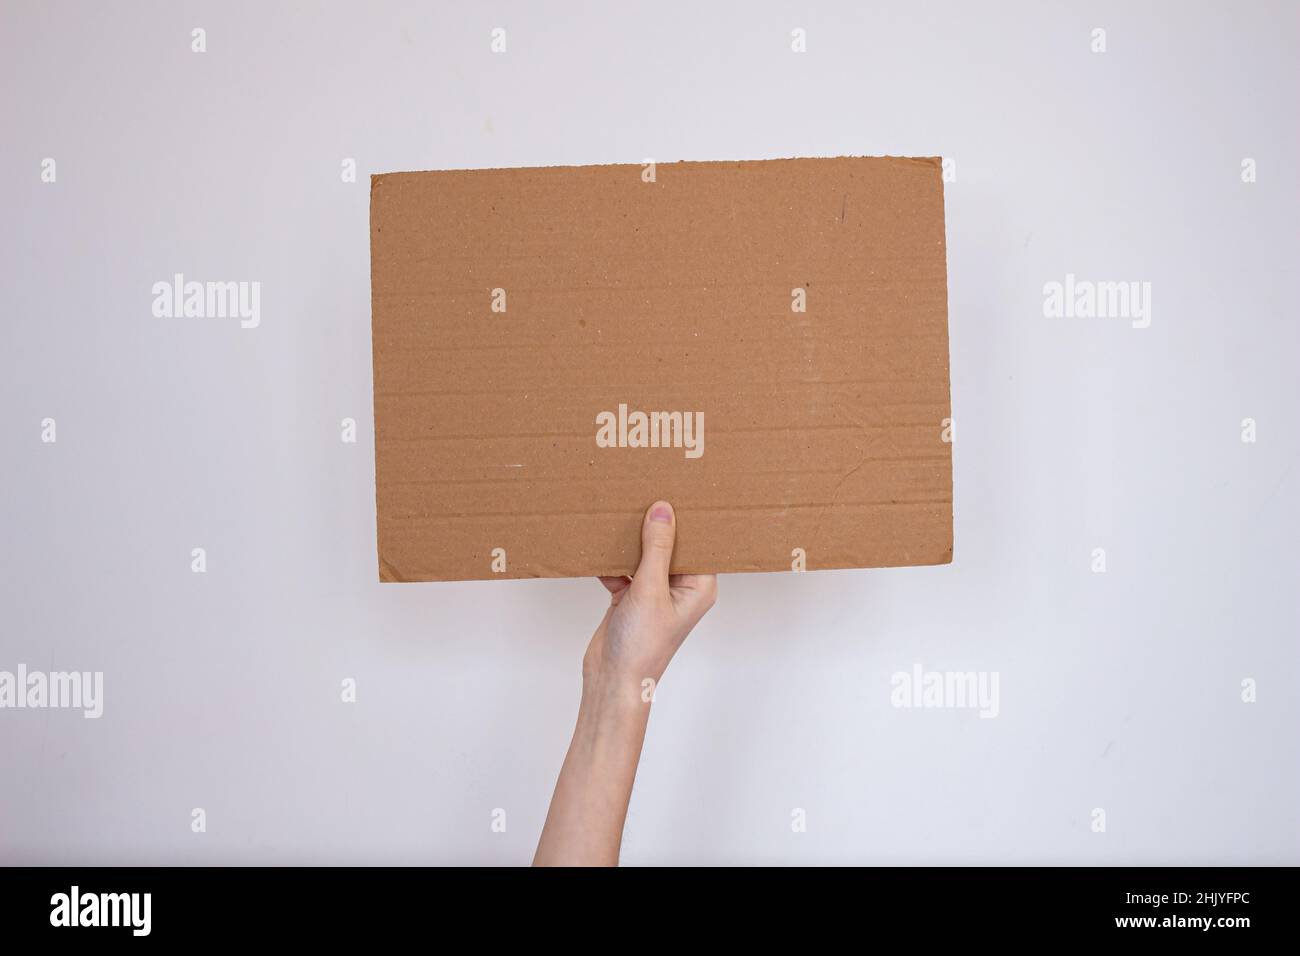 Hand holding blank cardboard box. Copy space for text on cardboard. Protester holding sign board isolated on white background. Stock Photo